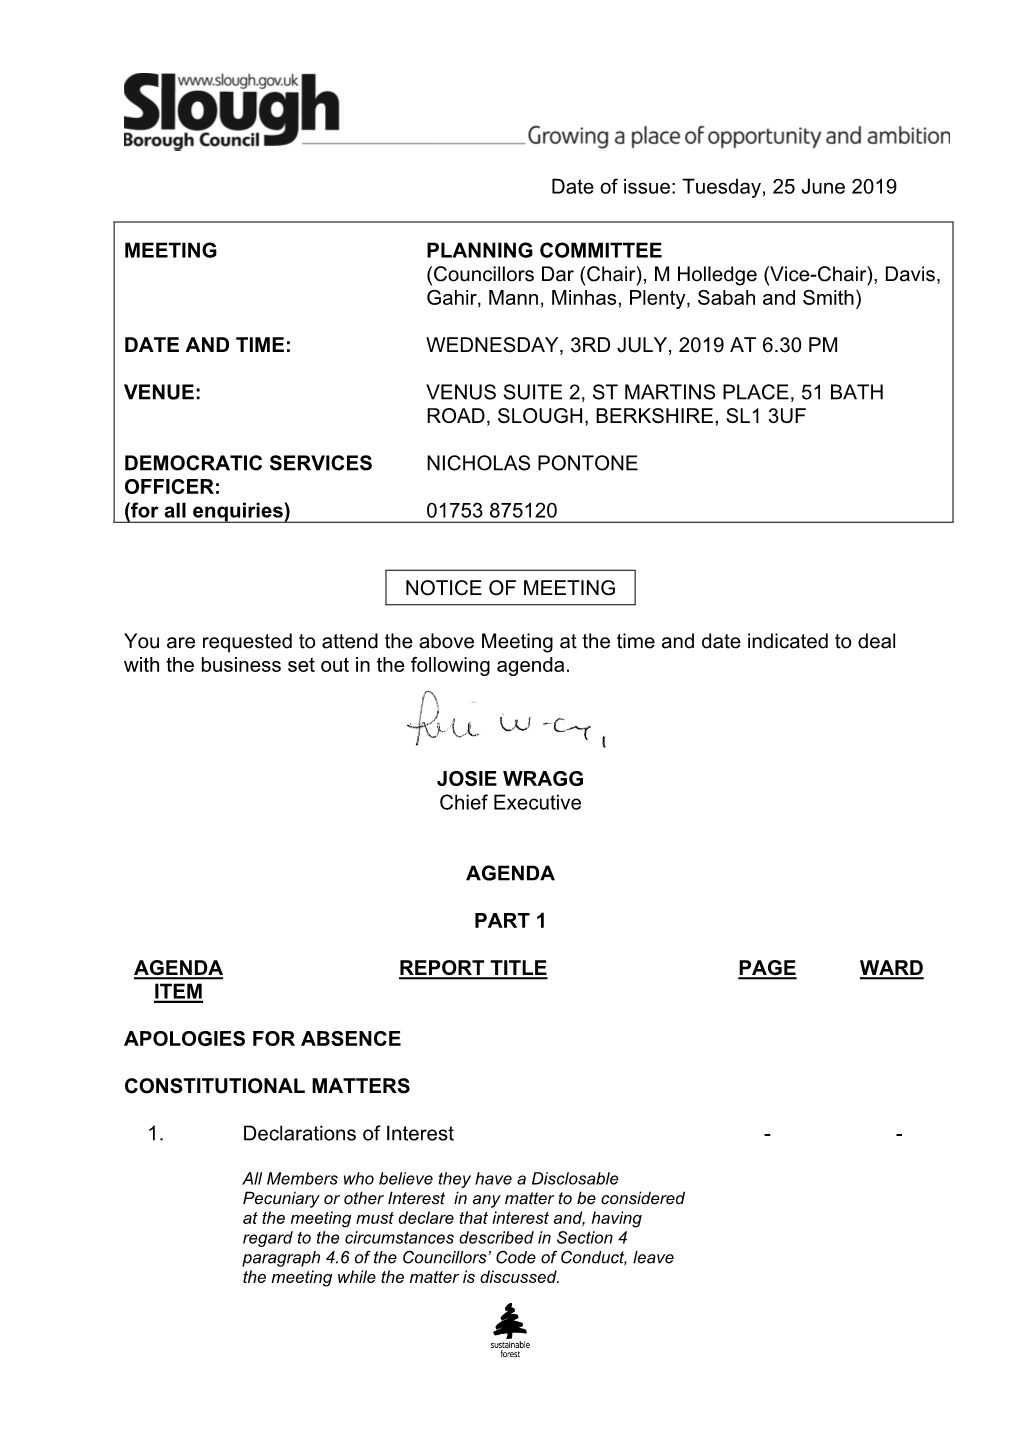 (Public Pack)Agenda Document for Planning Committee, 03/07/2019 18:30